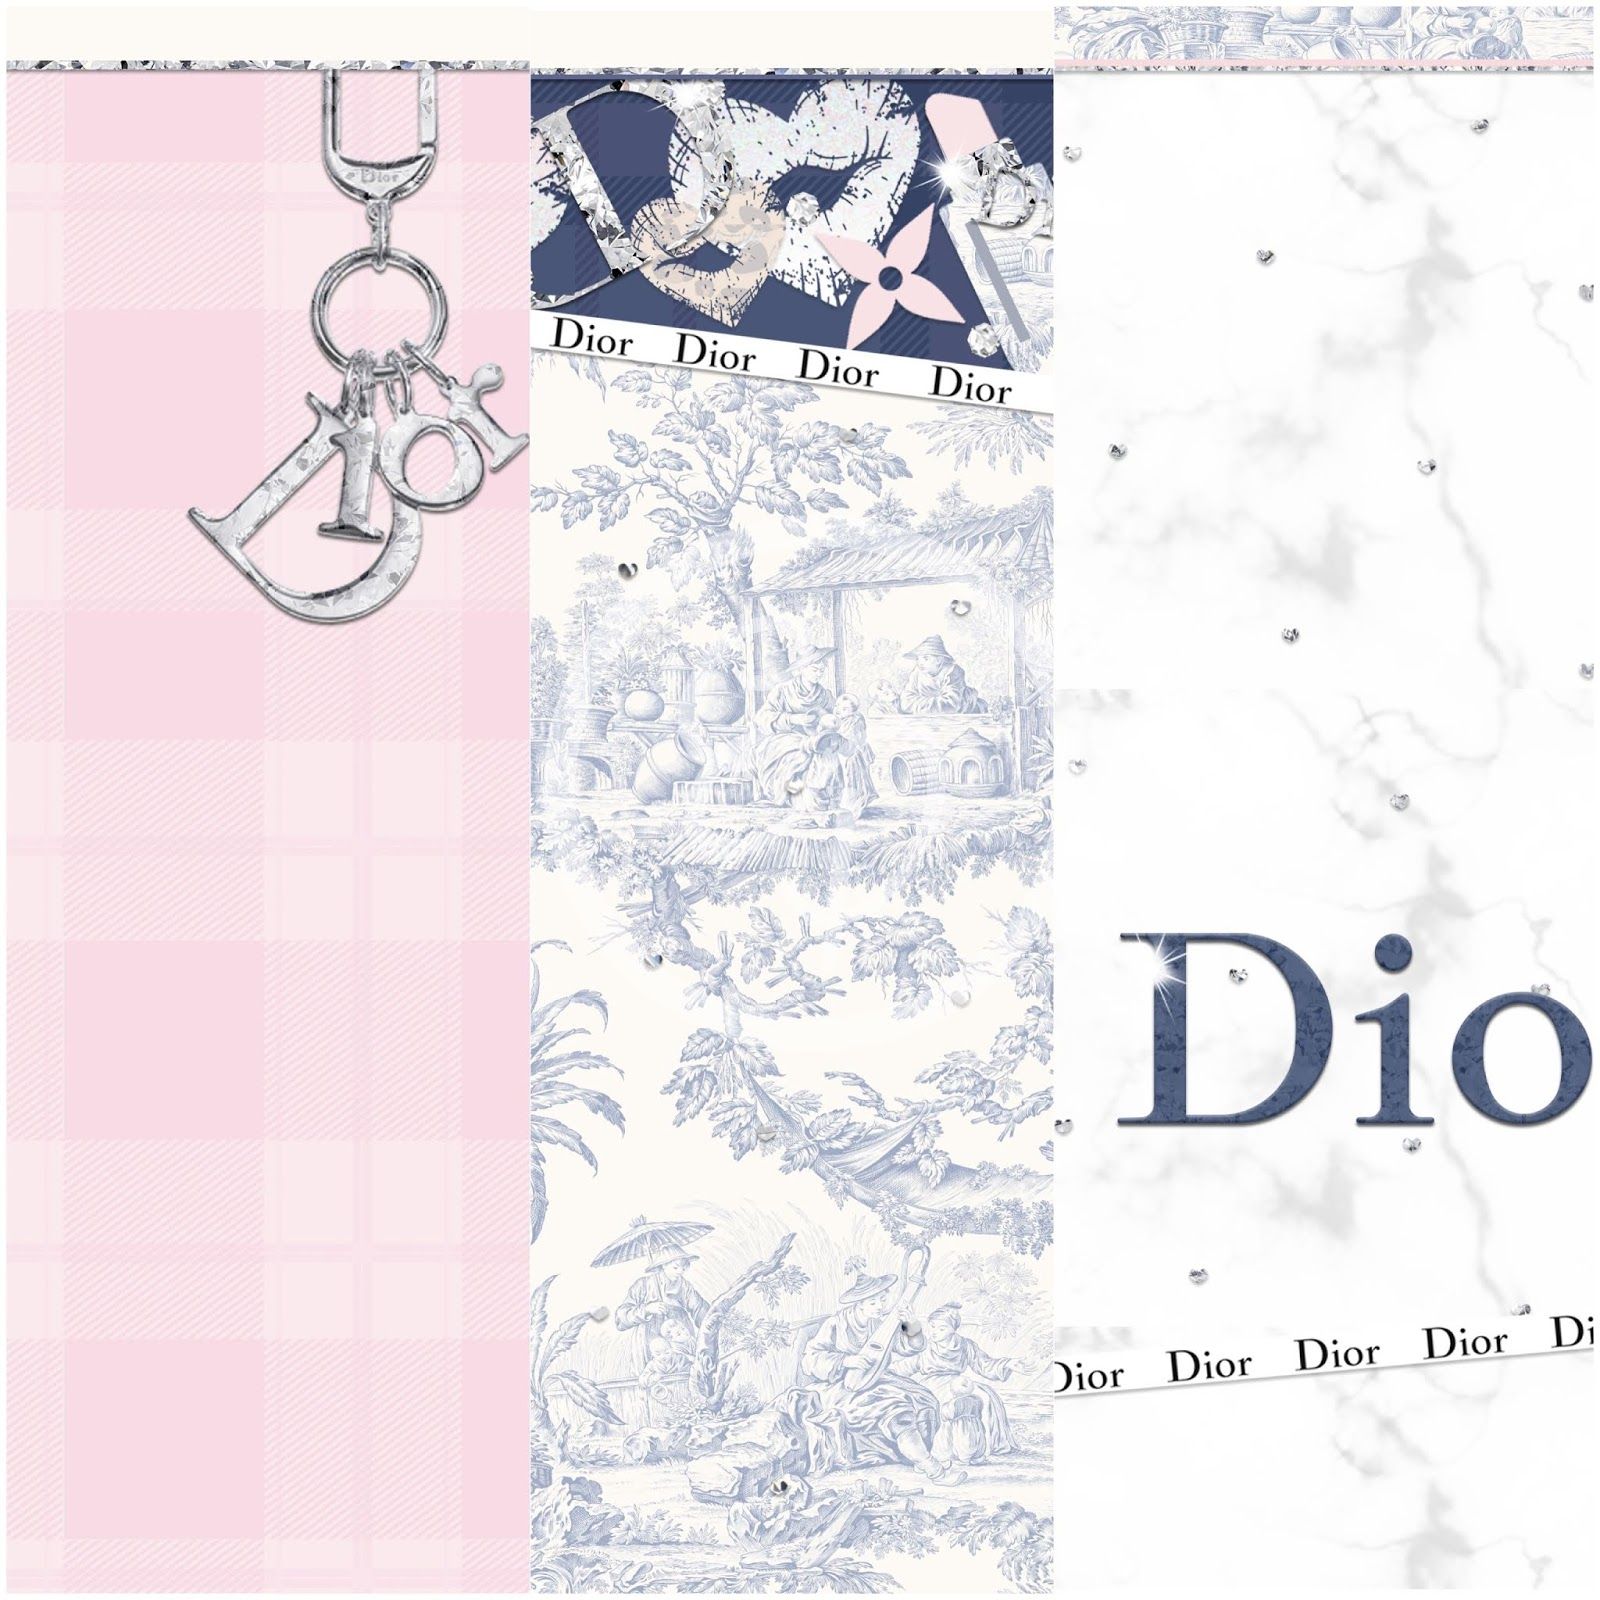 Download wallpapers Happy Birthday Dior 4k pink neon lights Dior name  creative Dior Happy Birthday Dior Birthday popular american female  names picture with Dior name Dior for desktop free Pictures for desktop